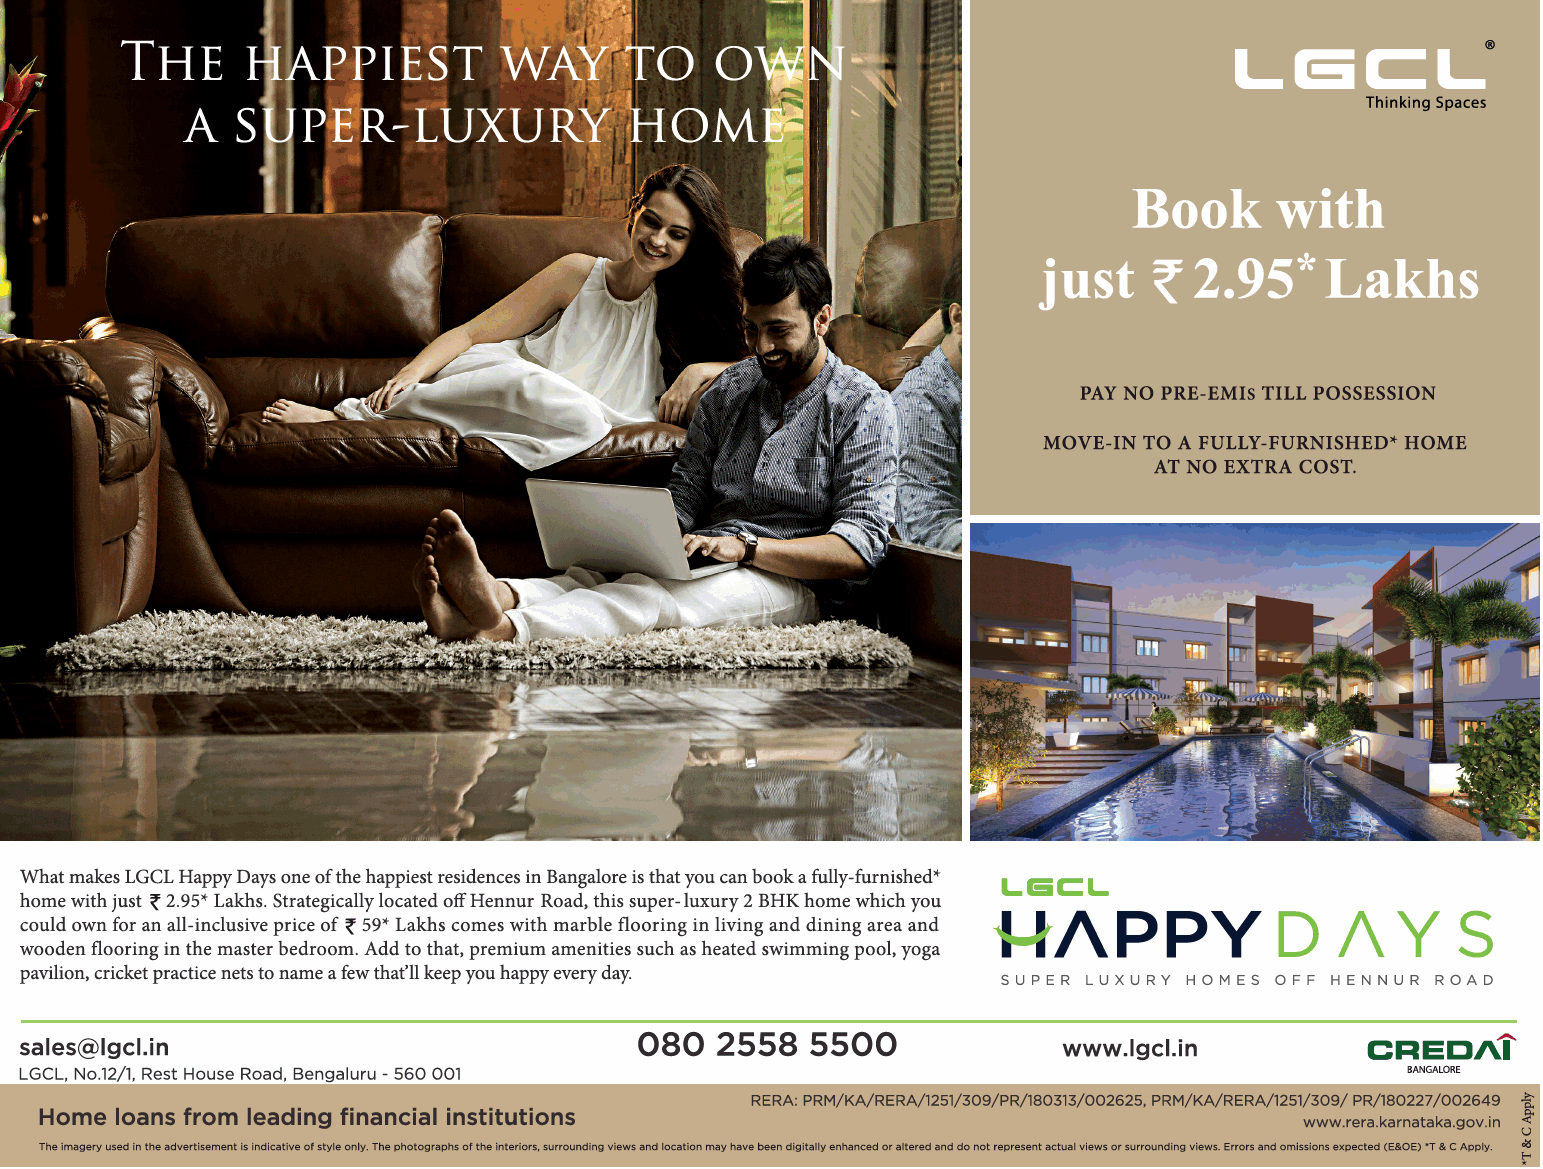 lgcl-happy-days-the-happiest-way-to-own-a-super-luxury-home-ad-times-property-bangalore-10-05-2019.png